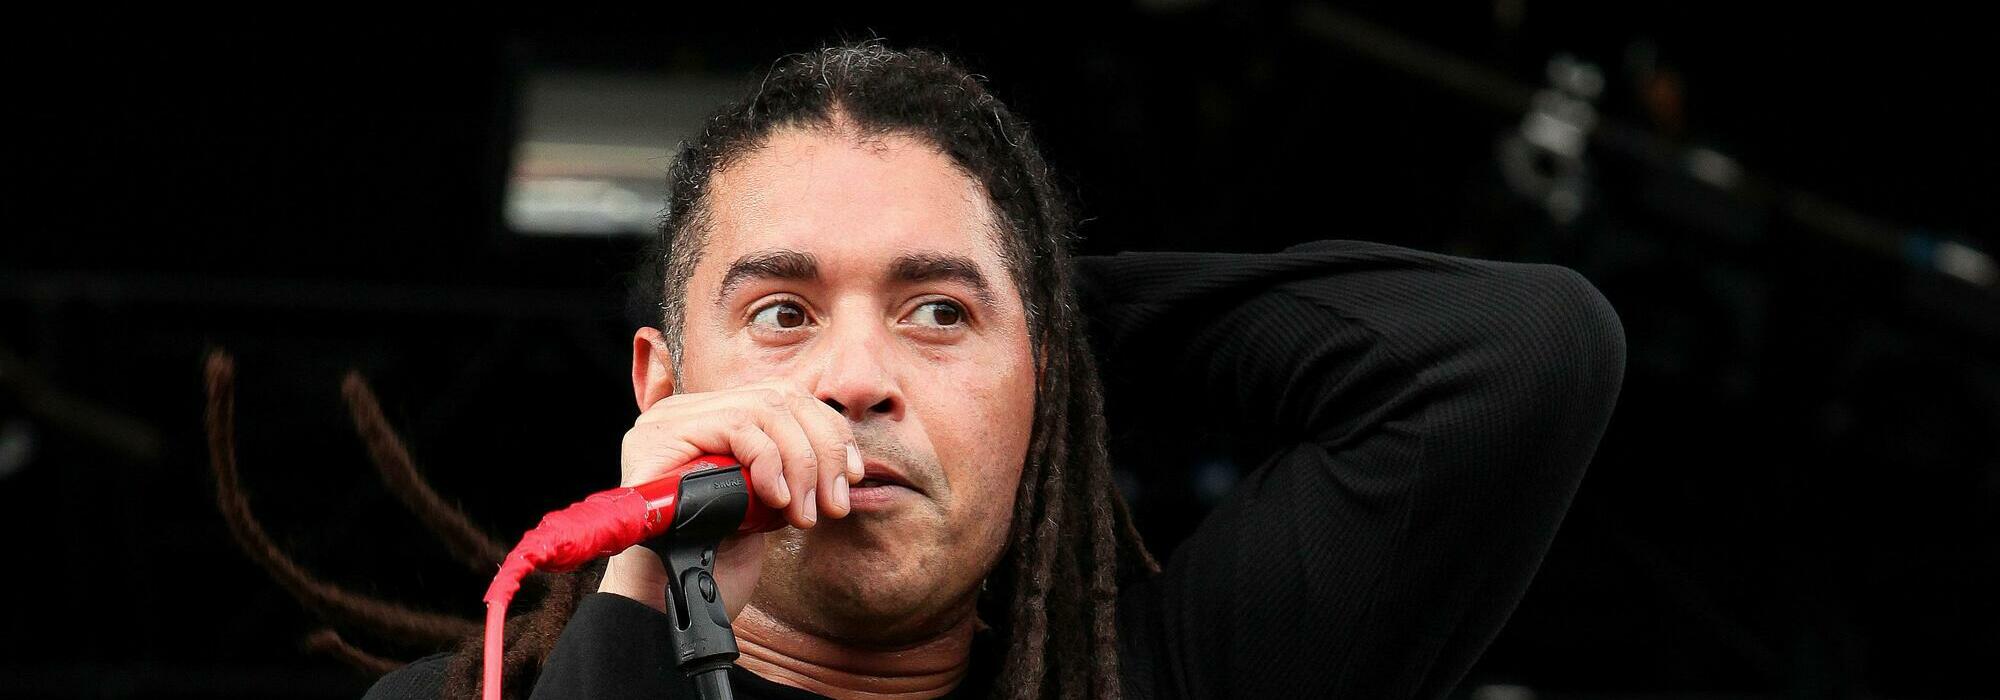 A Nonpoint live event